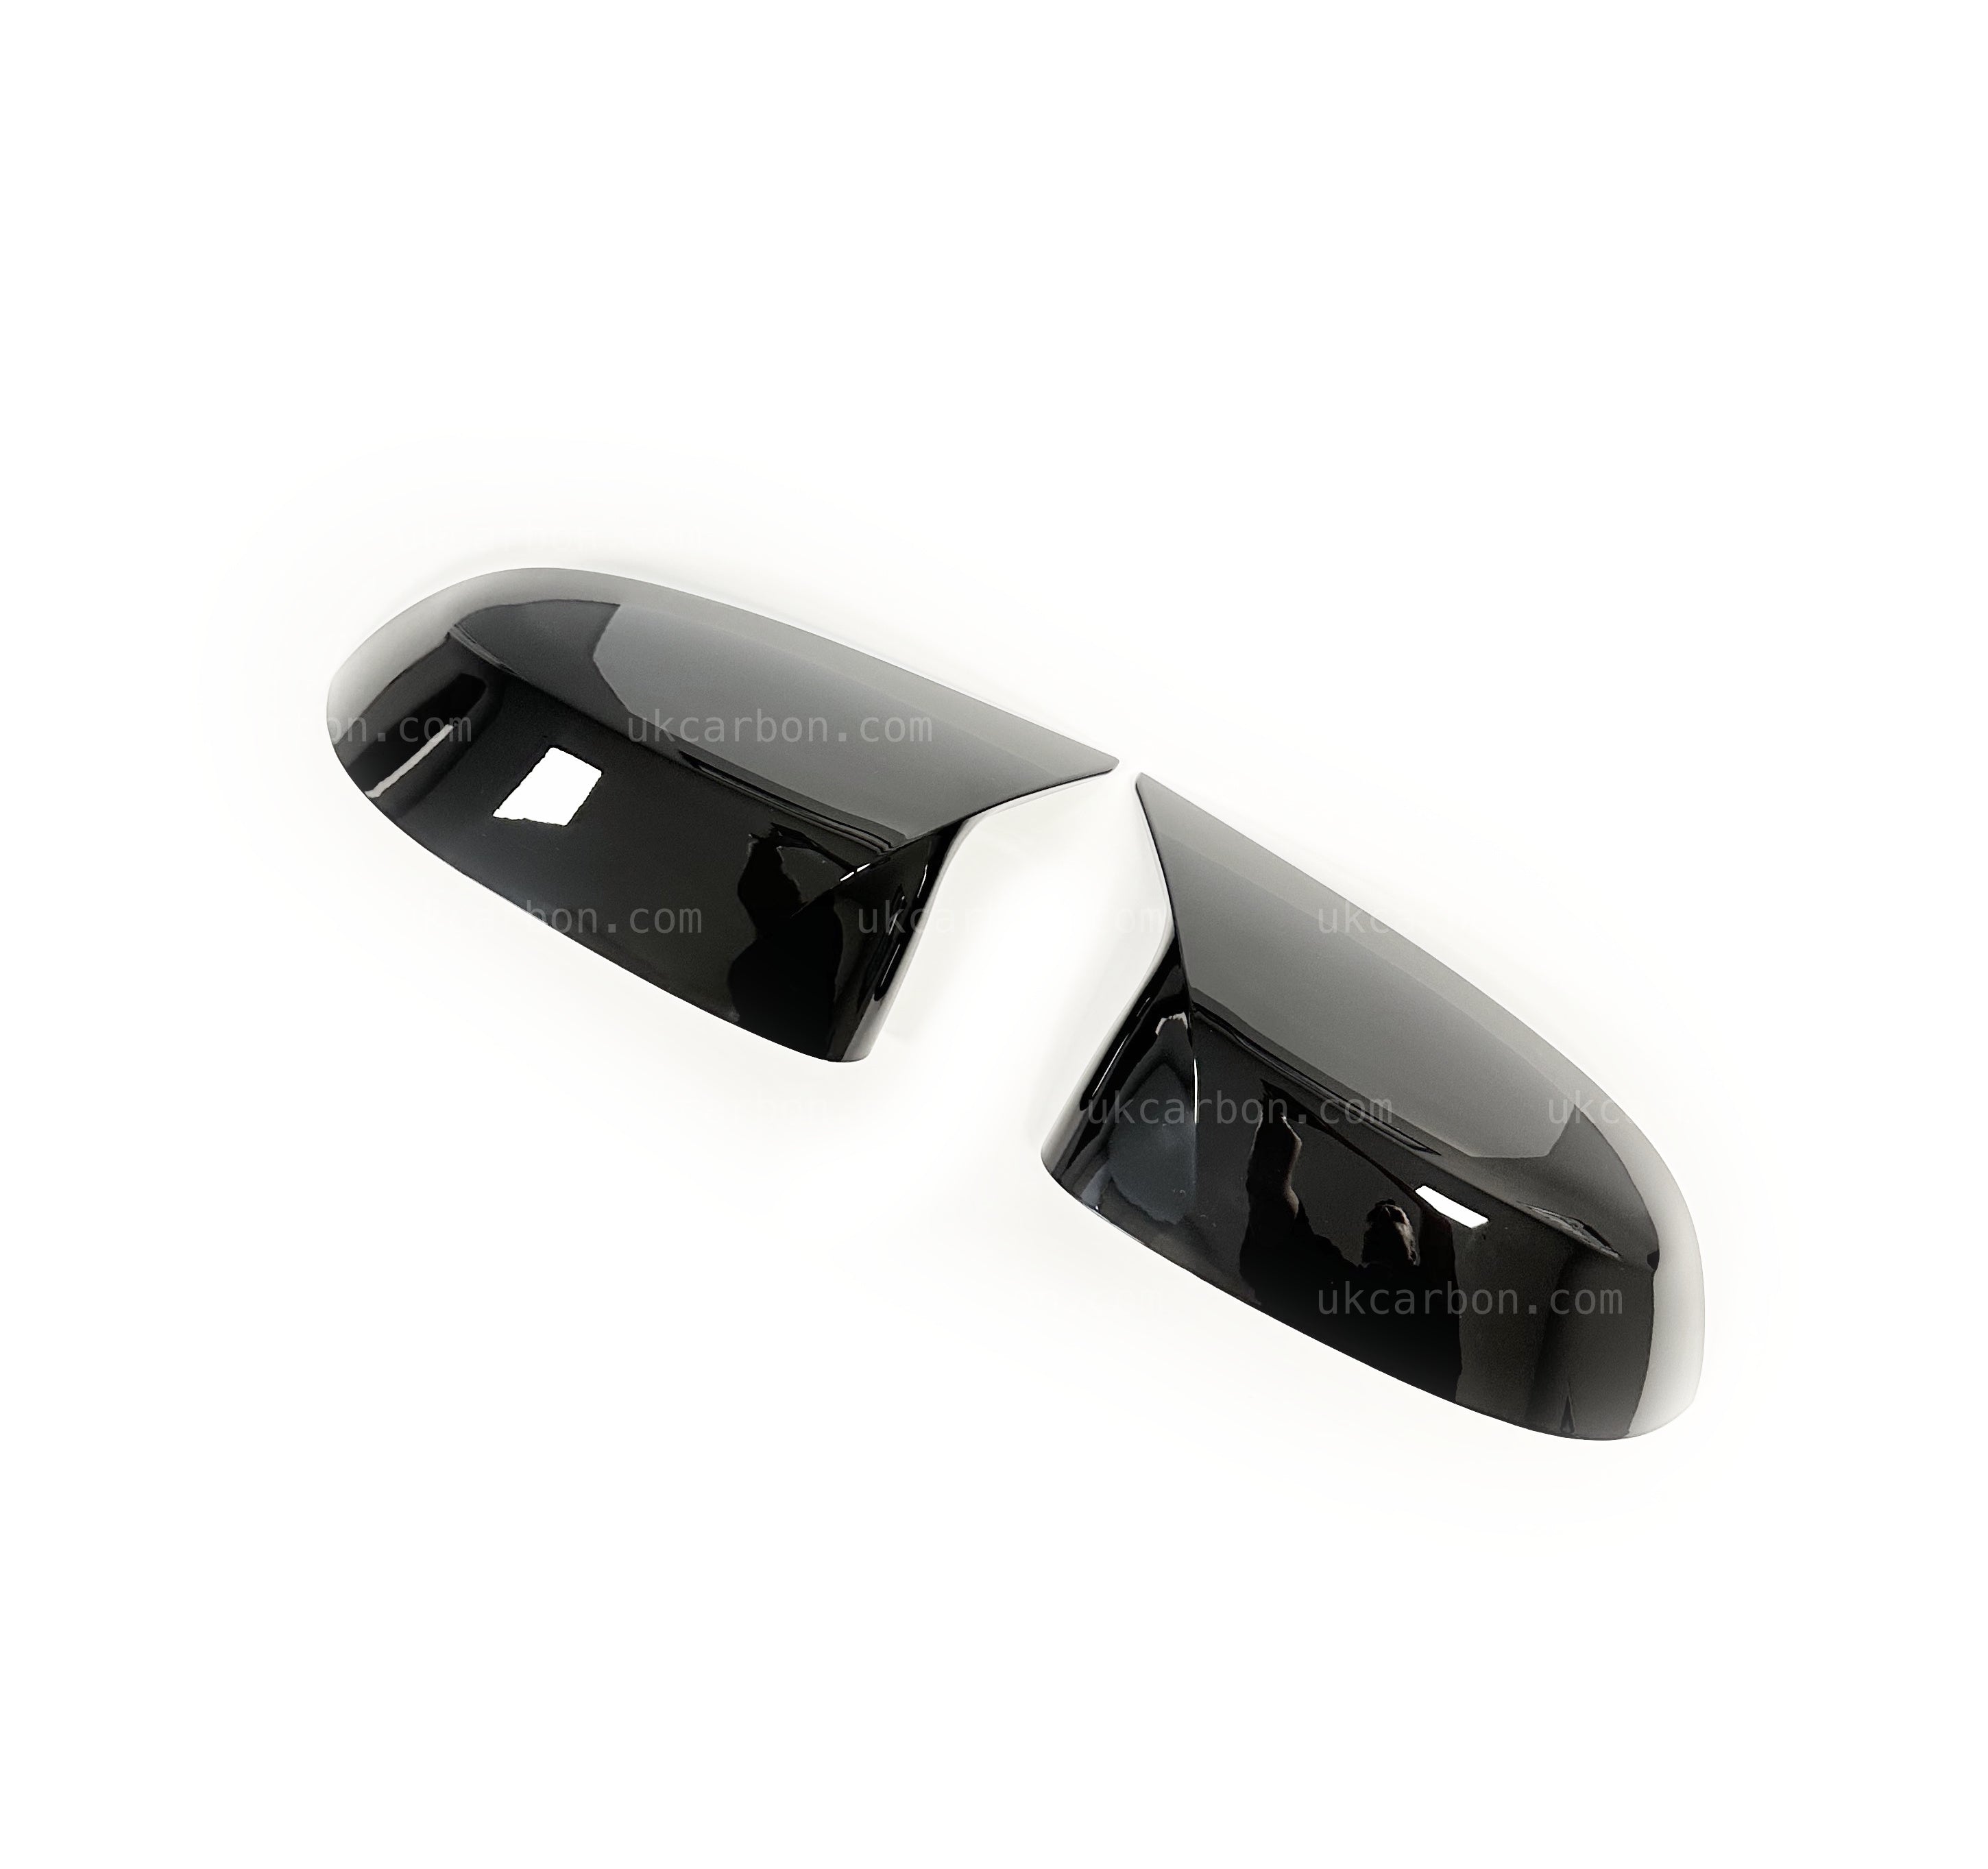 BMW X6 Gloss Black M Style Wing Mirror Cover M Performance G06 by UKCarbon